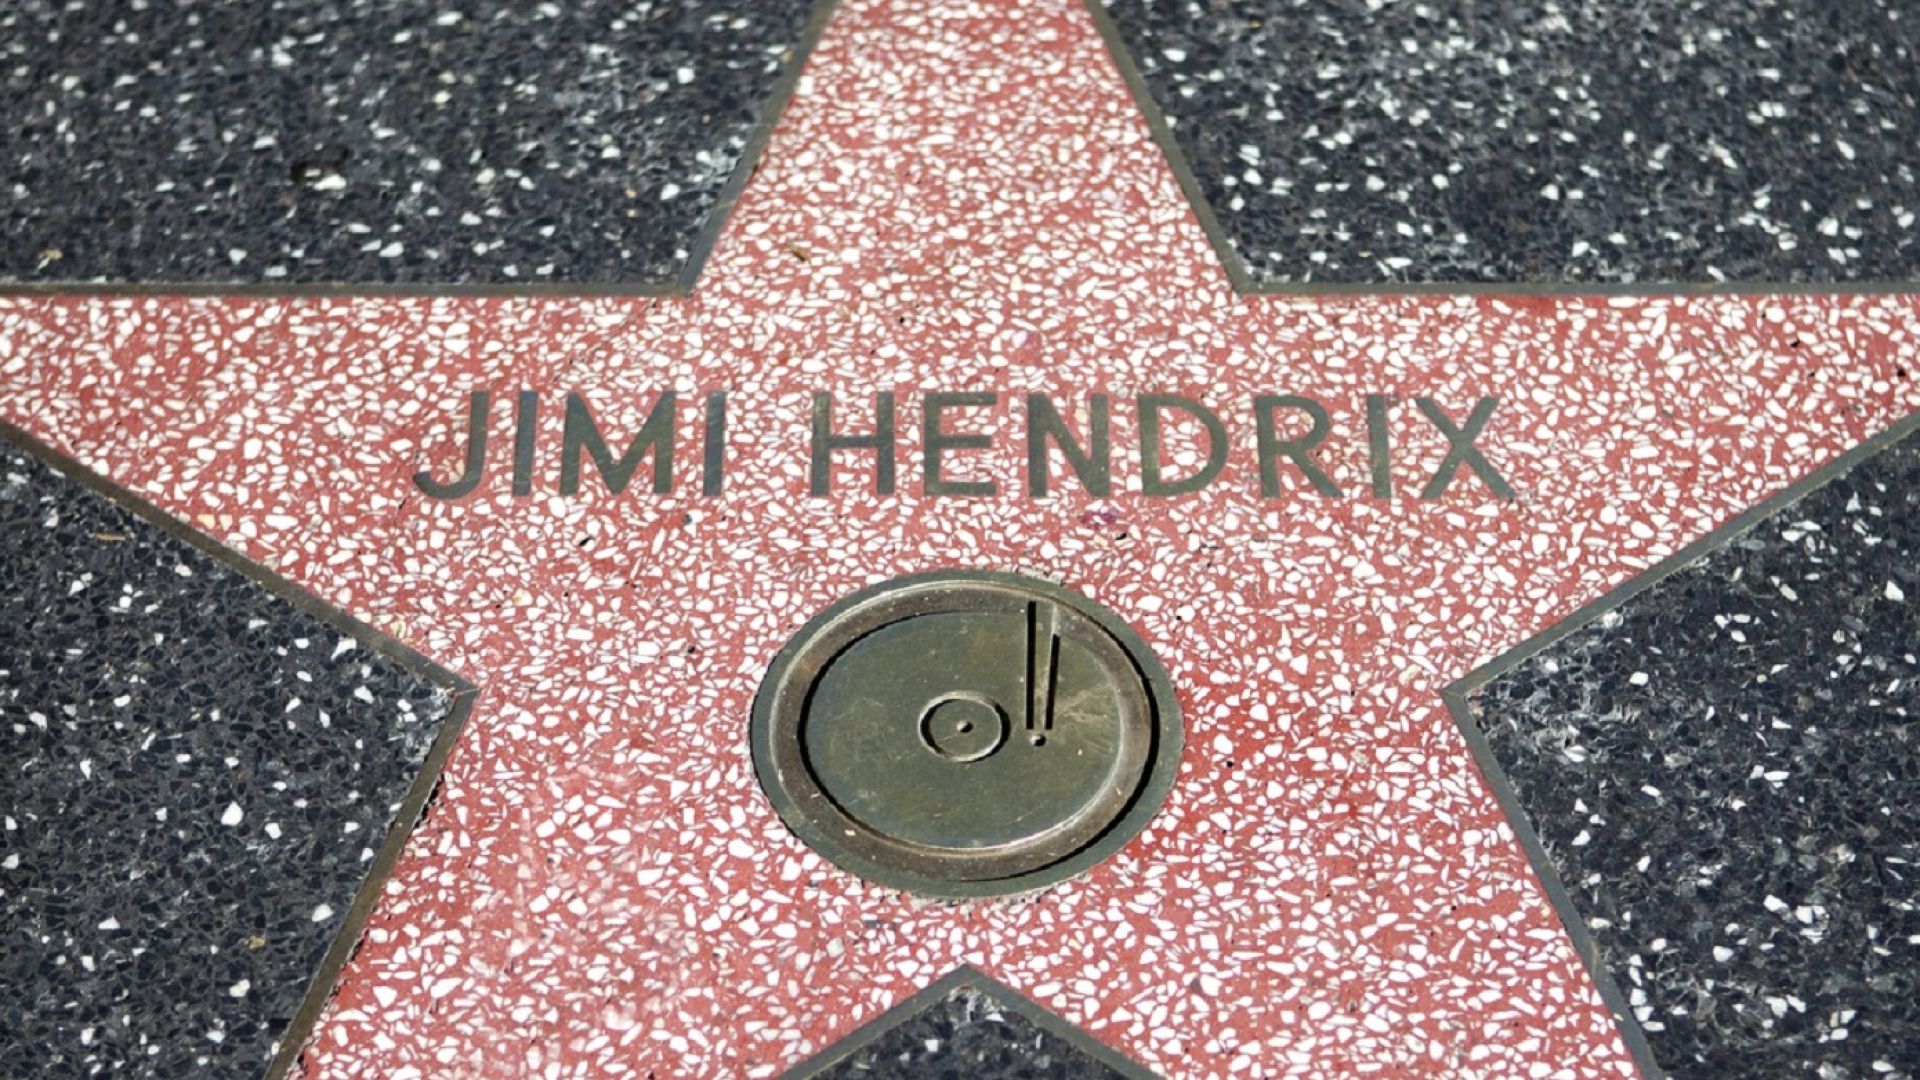 Jimi Hendrix star on the Hollywood Walk of Fame